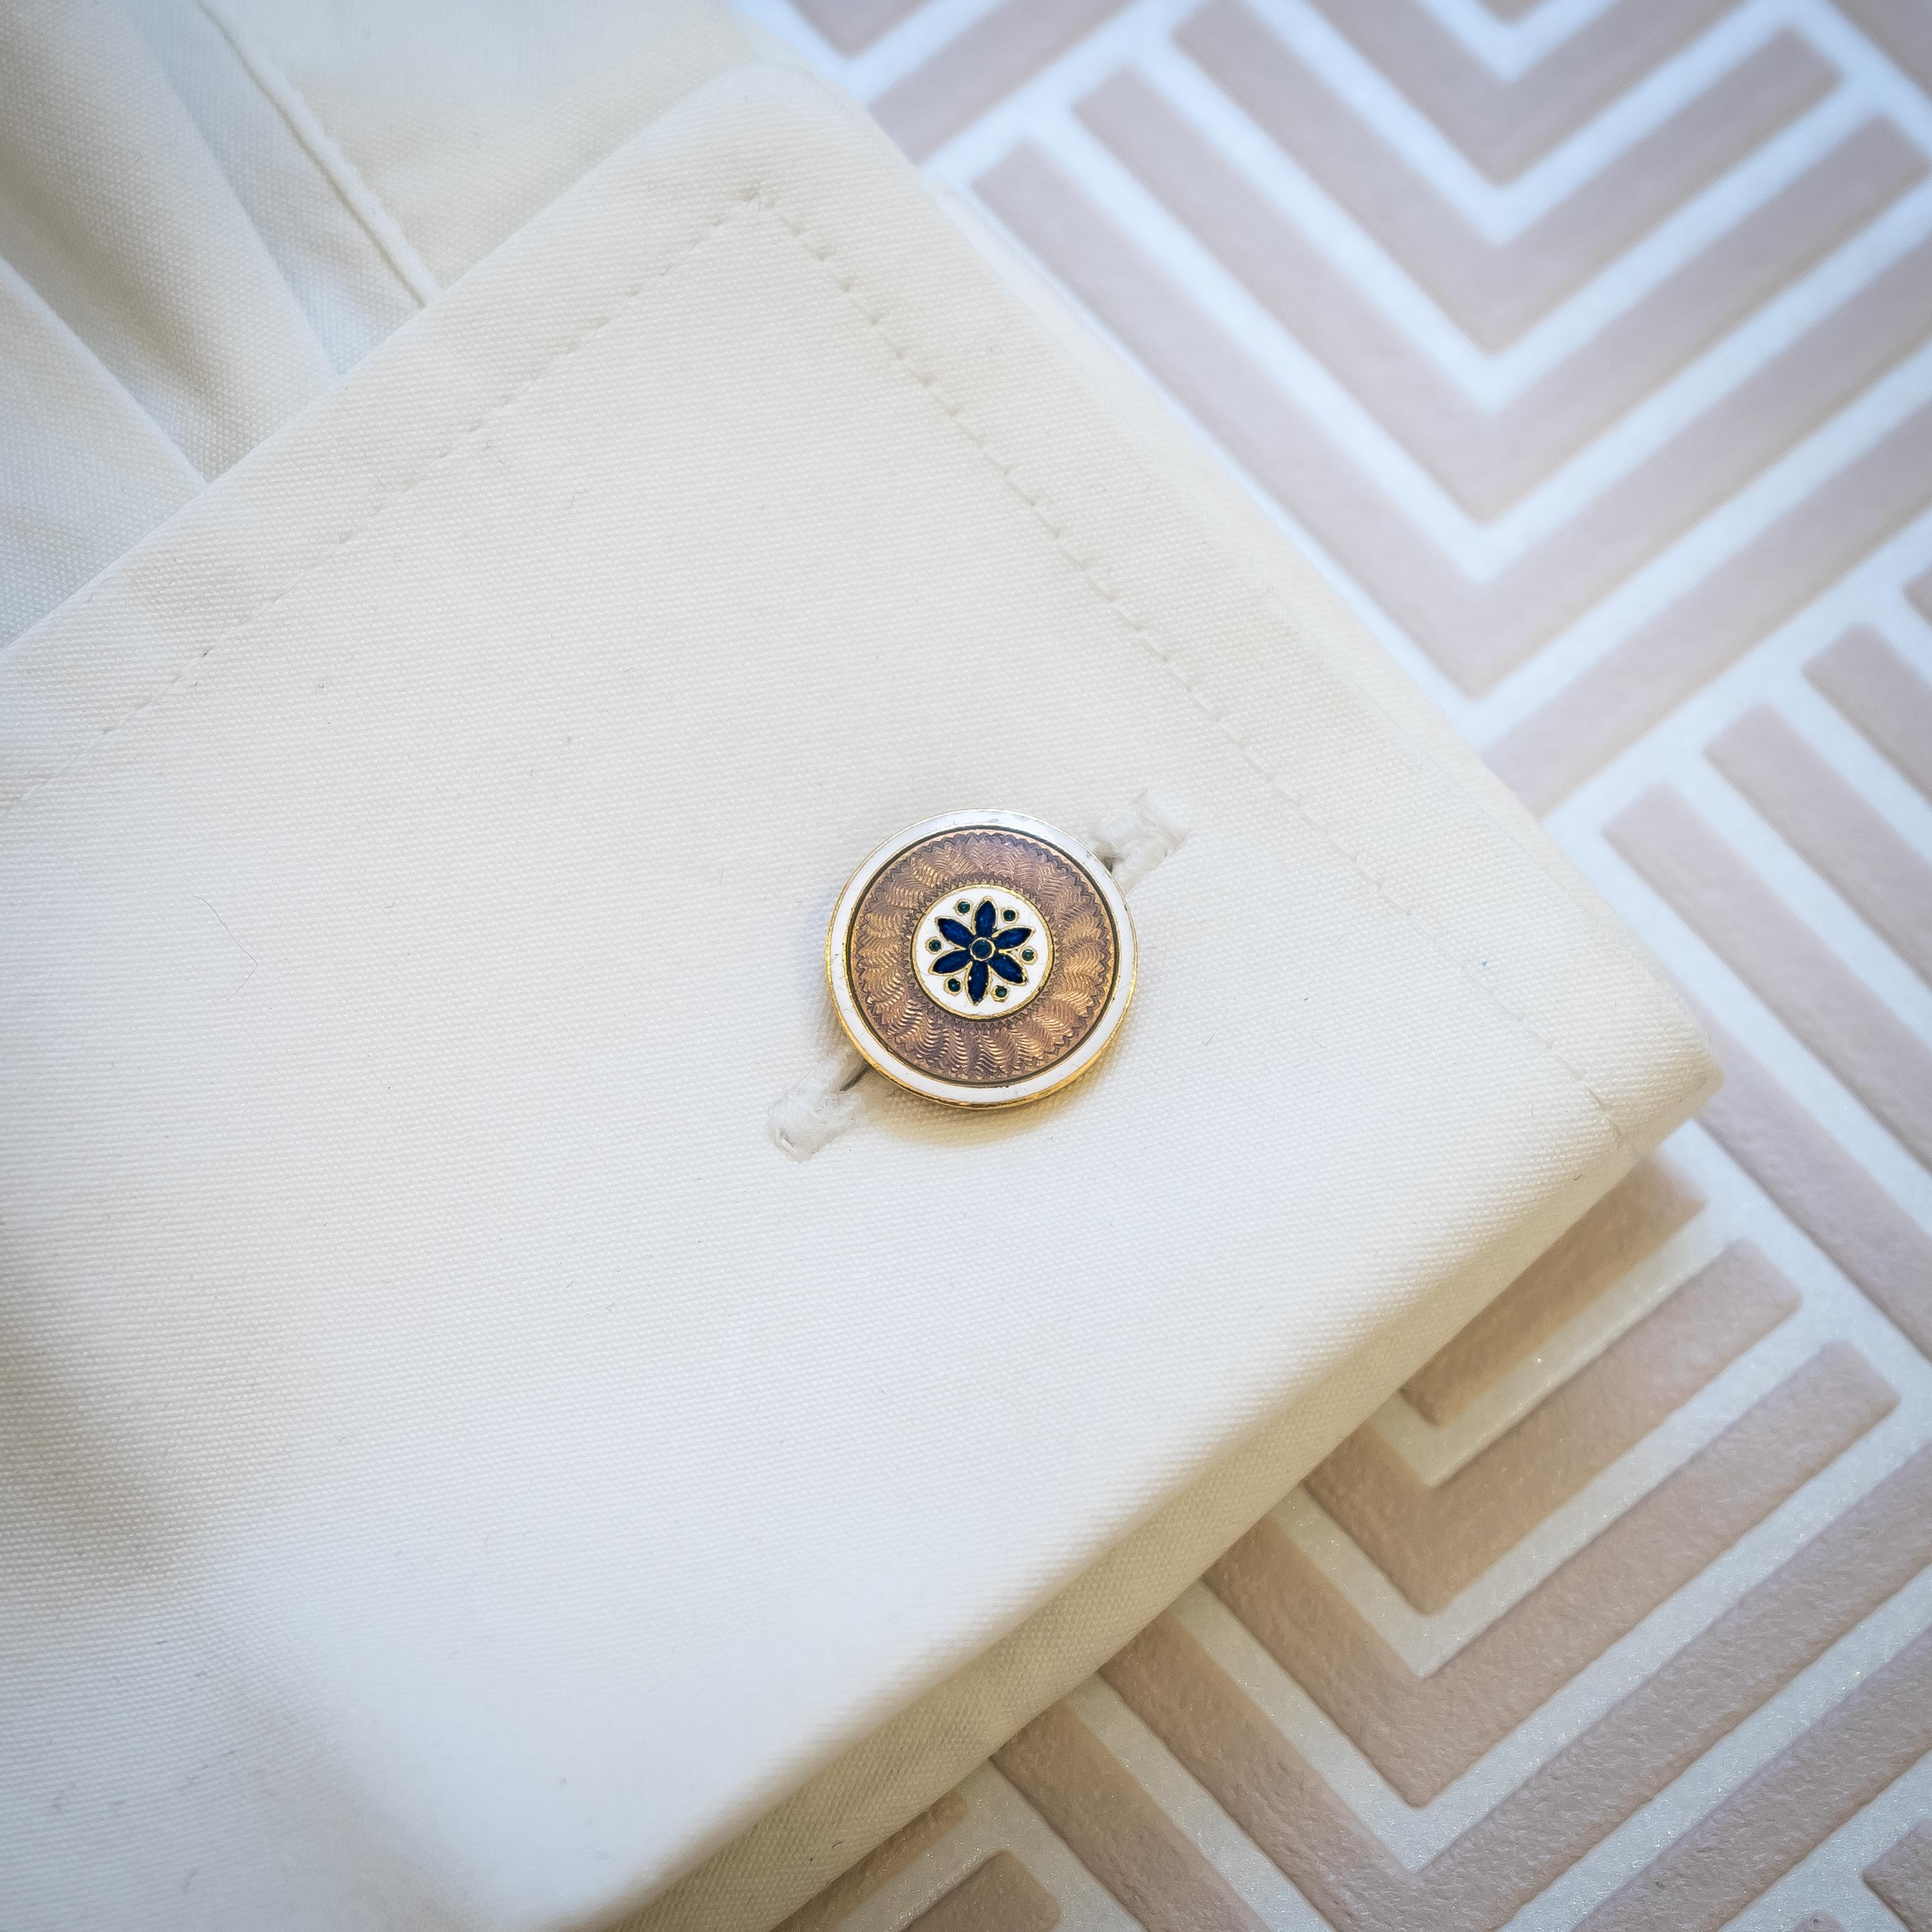 A pair of Art Deco Cartier enamel cufflinks, with a central dark blue, guilloche enamel flower, with green guilloche enamel dots, between the petals, on a white enamel background, surrounded by pale grey guilloche enamel, on a background of